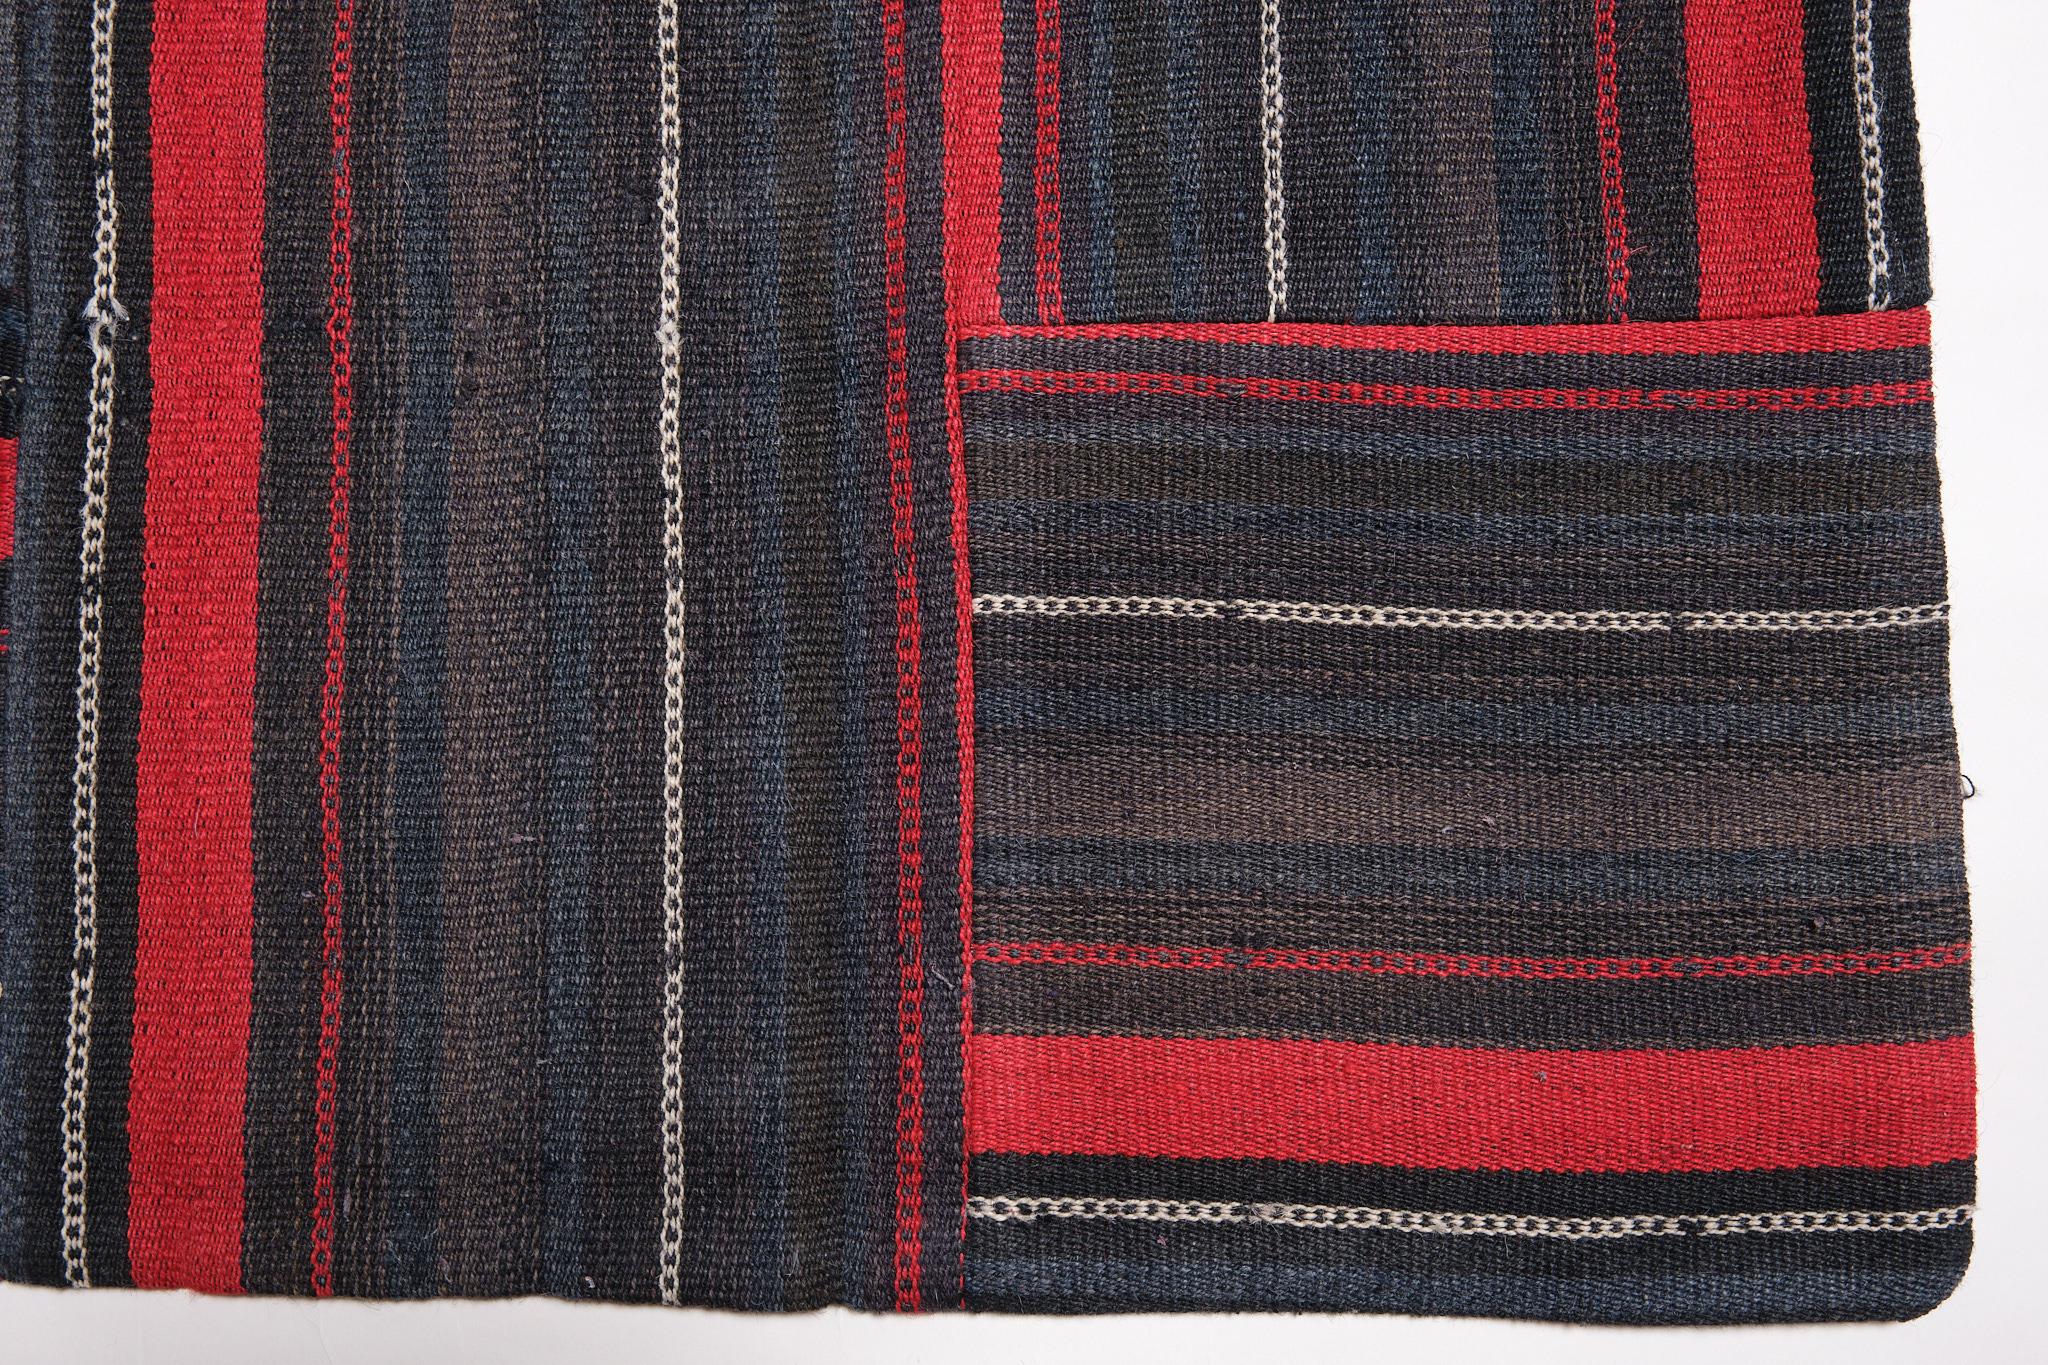 This is a Modern Kilim rug from Turkey with a rare and beautiful color composition.

It is a patchwork kilim rug by combining three types of narrow and long old kilims called Perde.
In real life, these kilims were woven into long strips, which